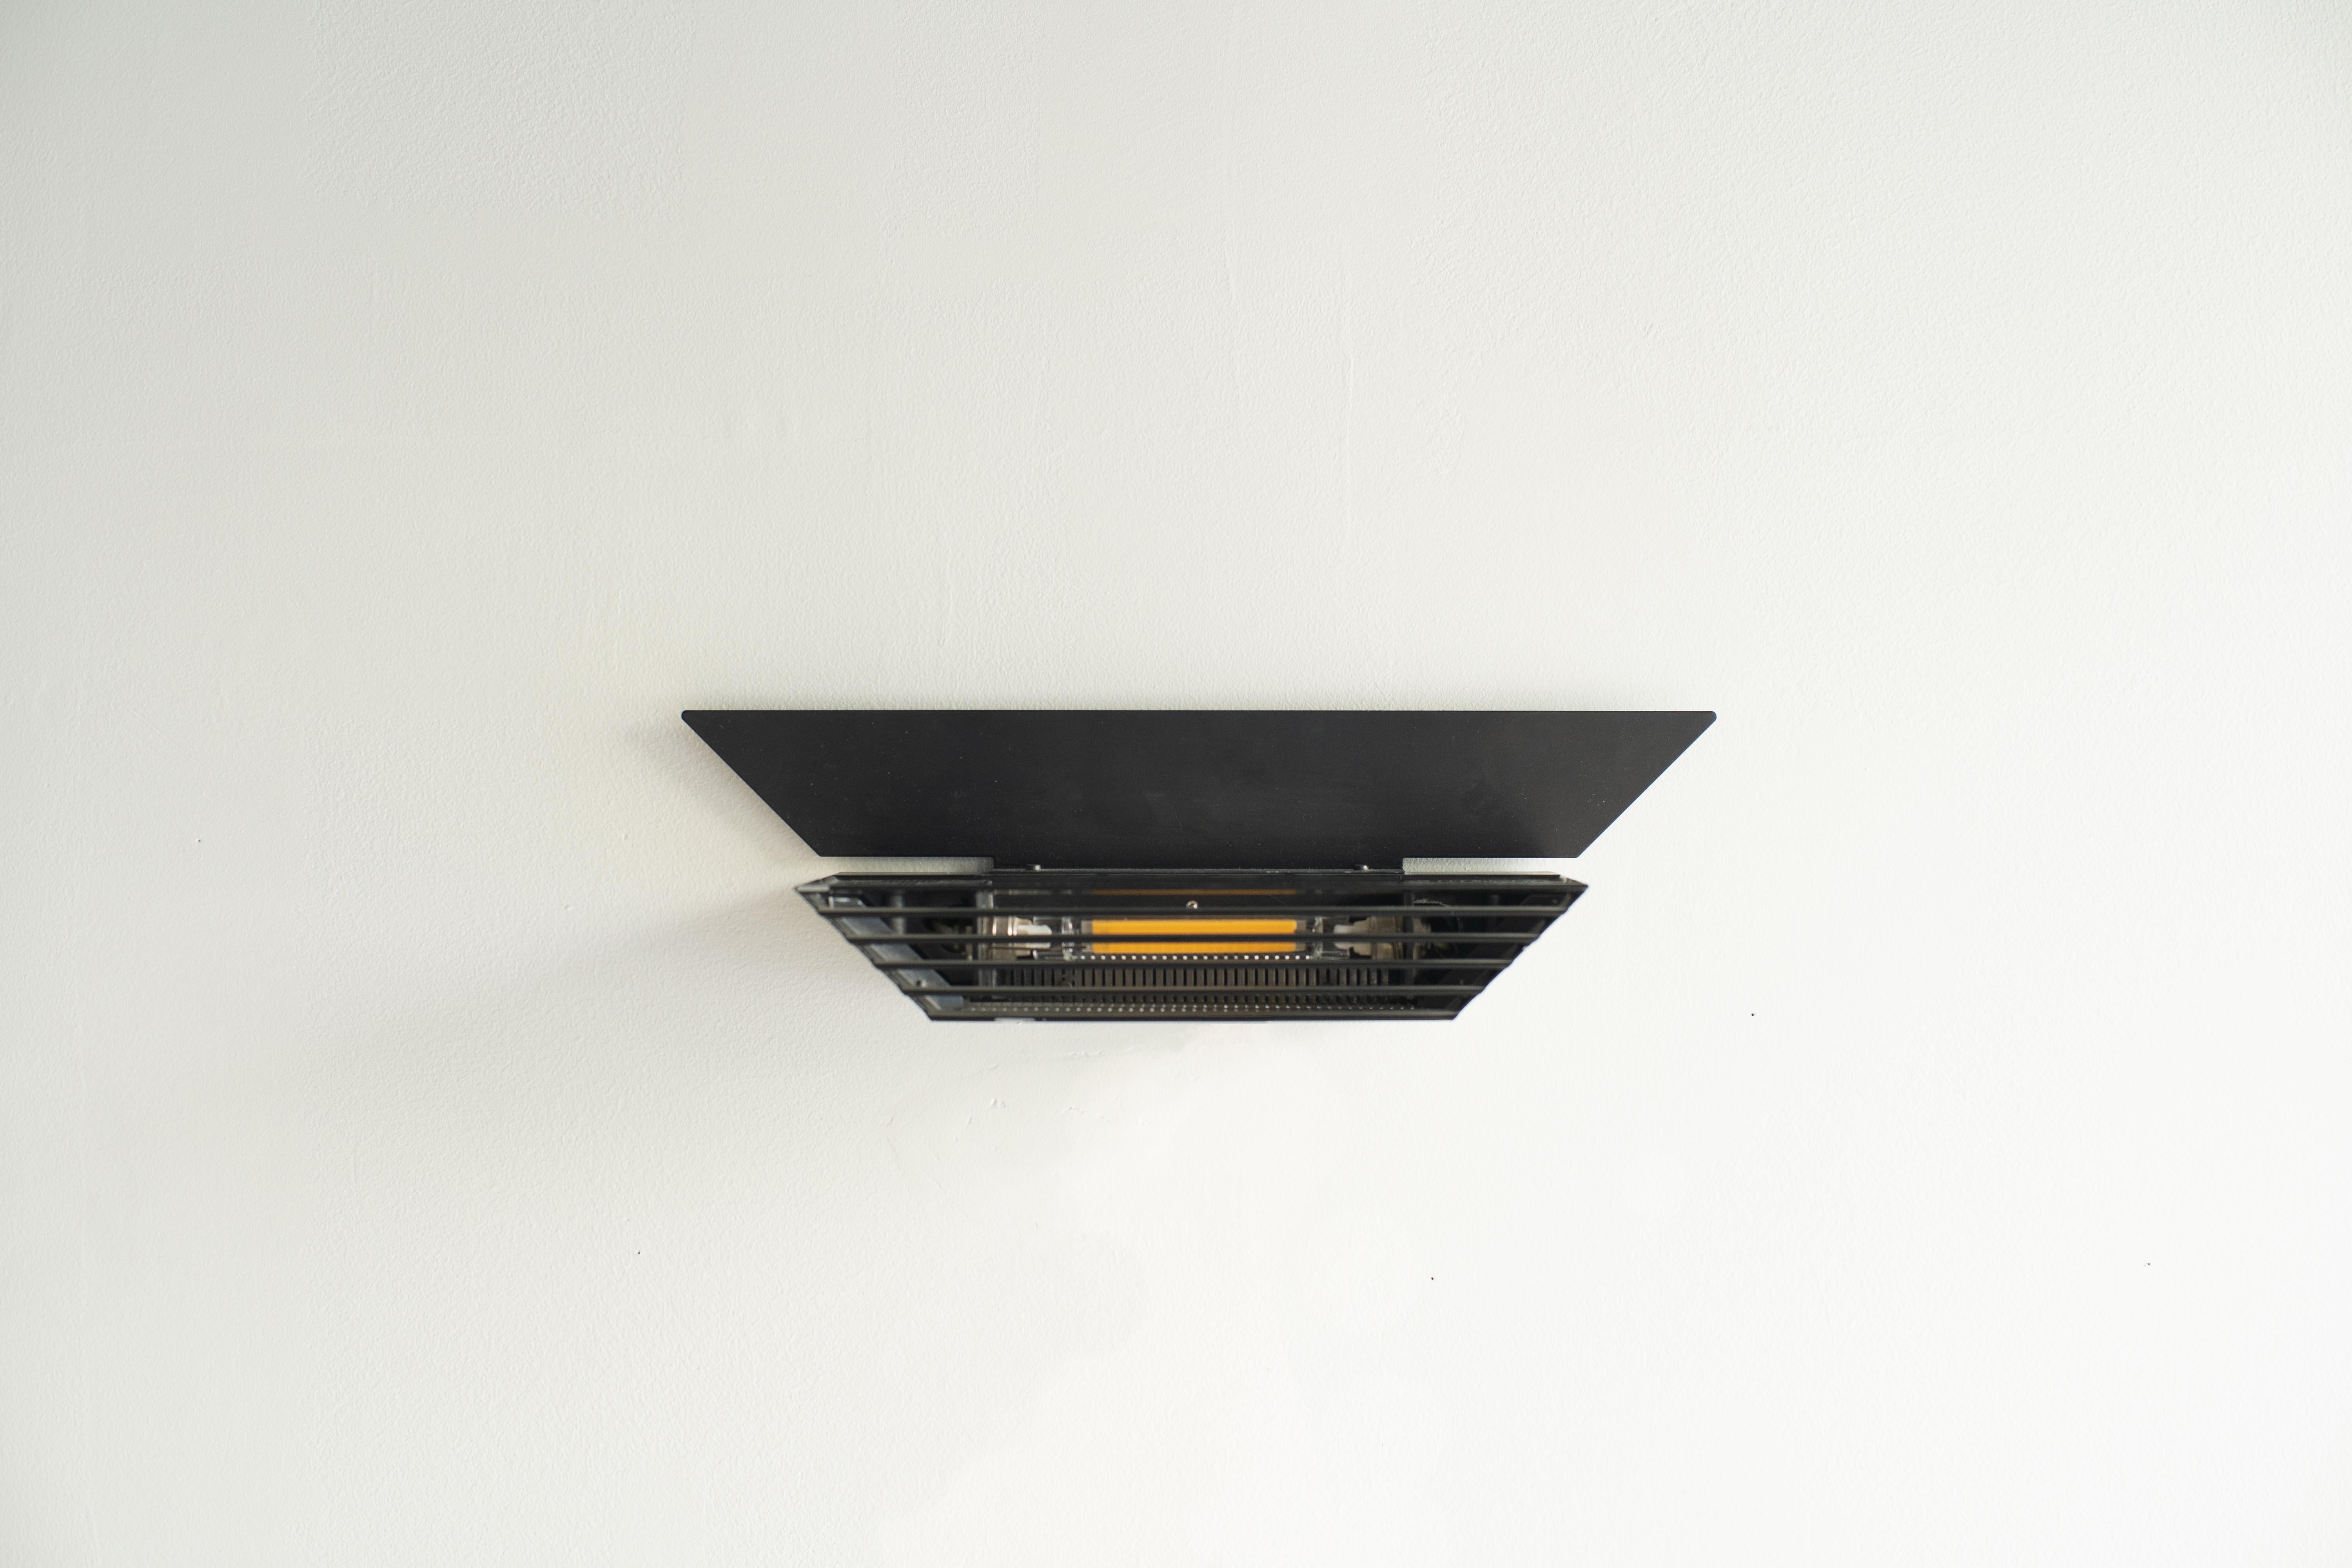 Wall lamp designed by Raul Barbieri and Giorgio Marianelli for Tronconi. The name is Deco Parete. Black steel painted body.
Light beam goes upward and downward. It's set to the ceiling. Sculptural piece on the wall.
100-240V use. R7s. LED